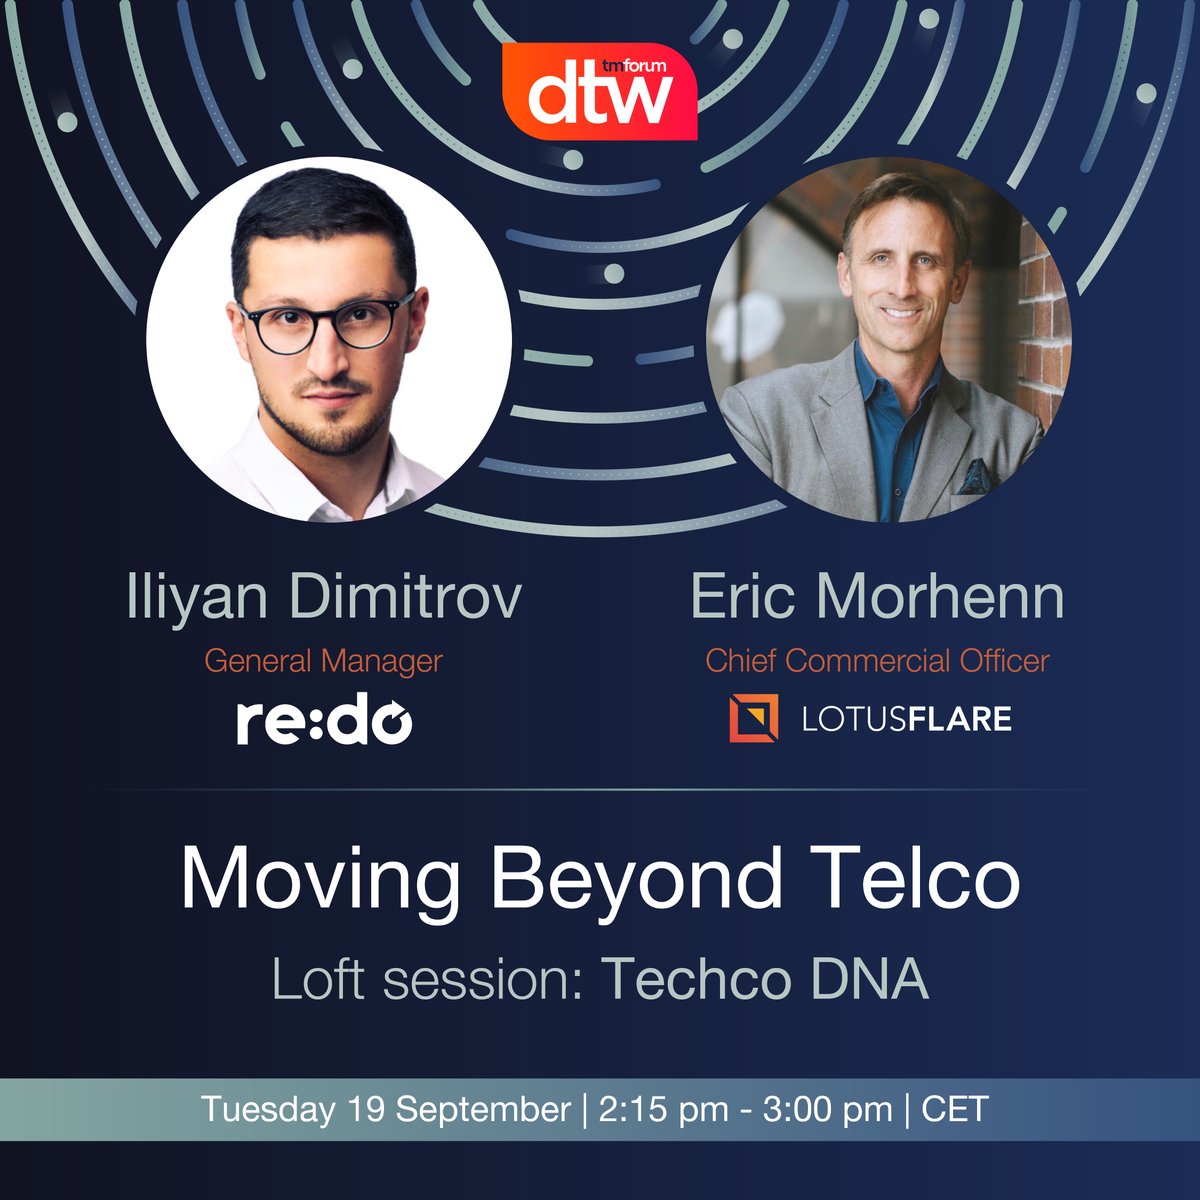 Ready for #DTW23? Hear Iliyan Dimitrov, General Manager of re:do, and Eric Morhenn, CCO of LotusFlare, discuss the journey of fully-digital telco re:do and how it is moving beyond telco. See you on the Loft Stage on Tuesday the 19th!